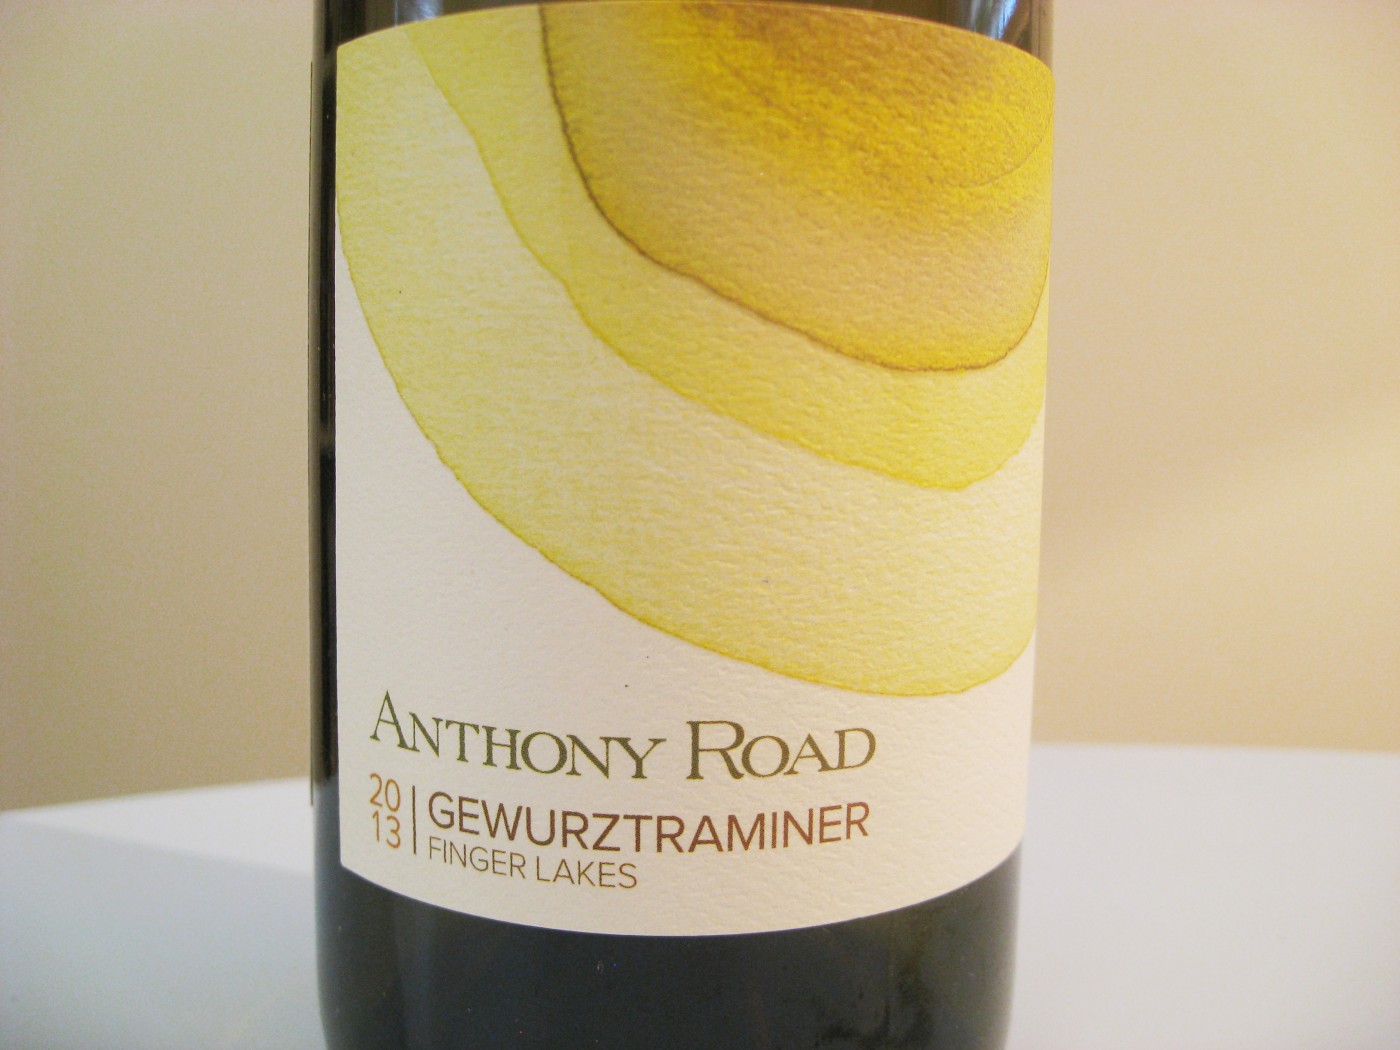 Anthony Road, Gewürztraminer 2013, Finger Lakes, New York, Wine Casual